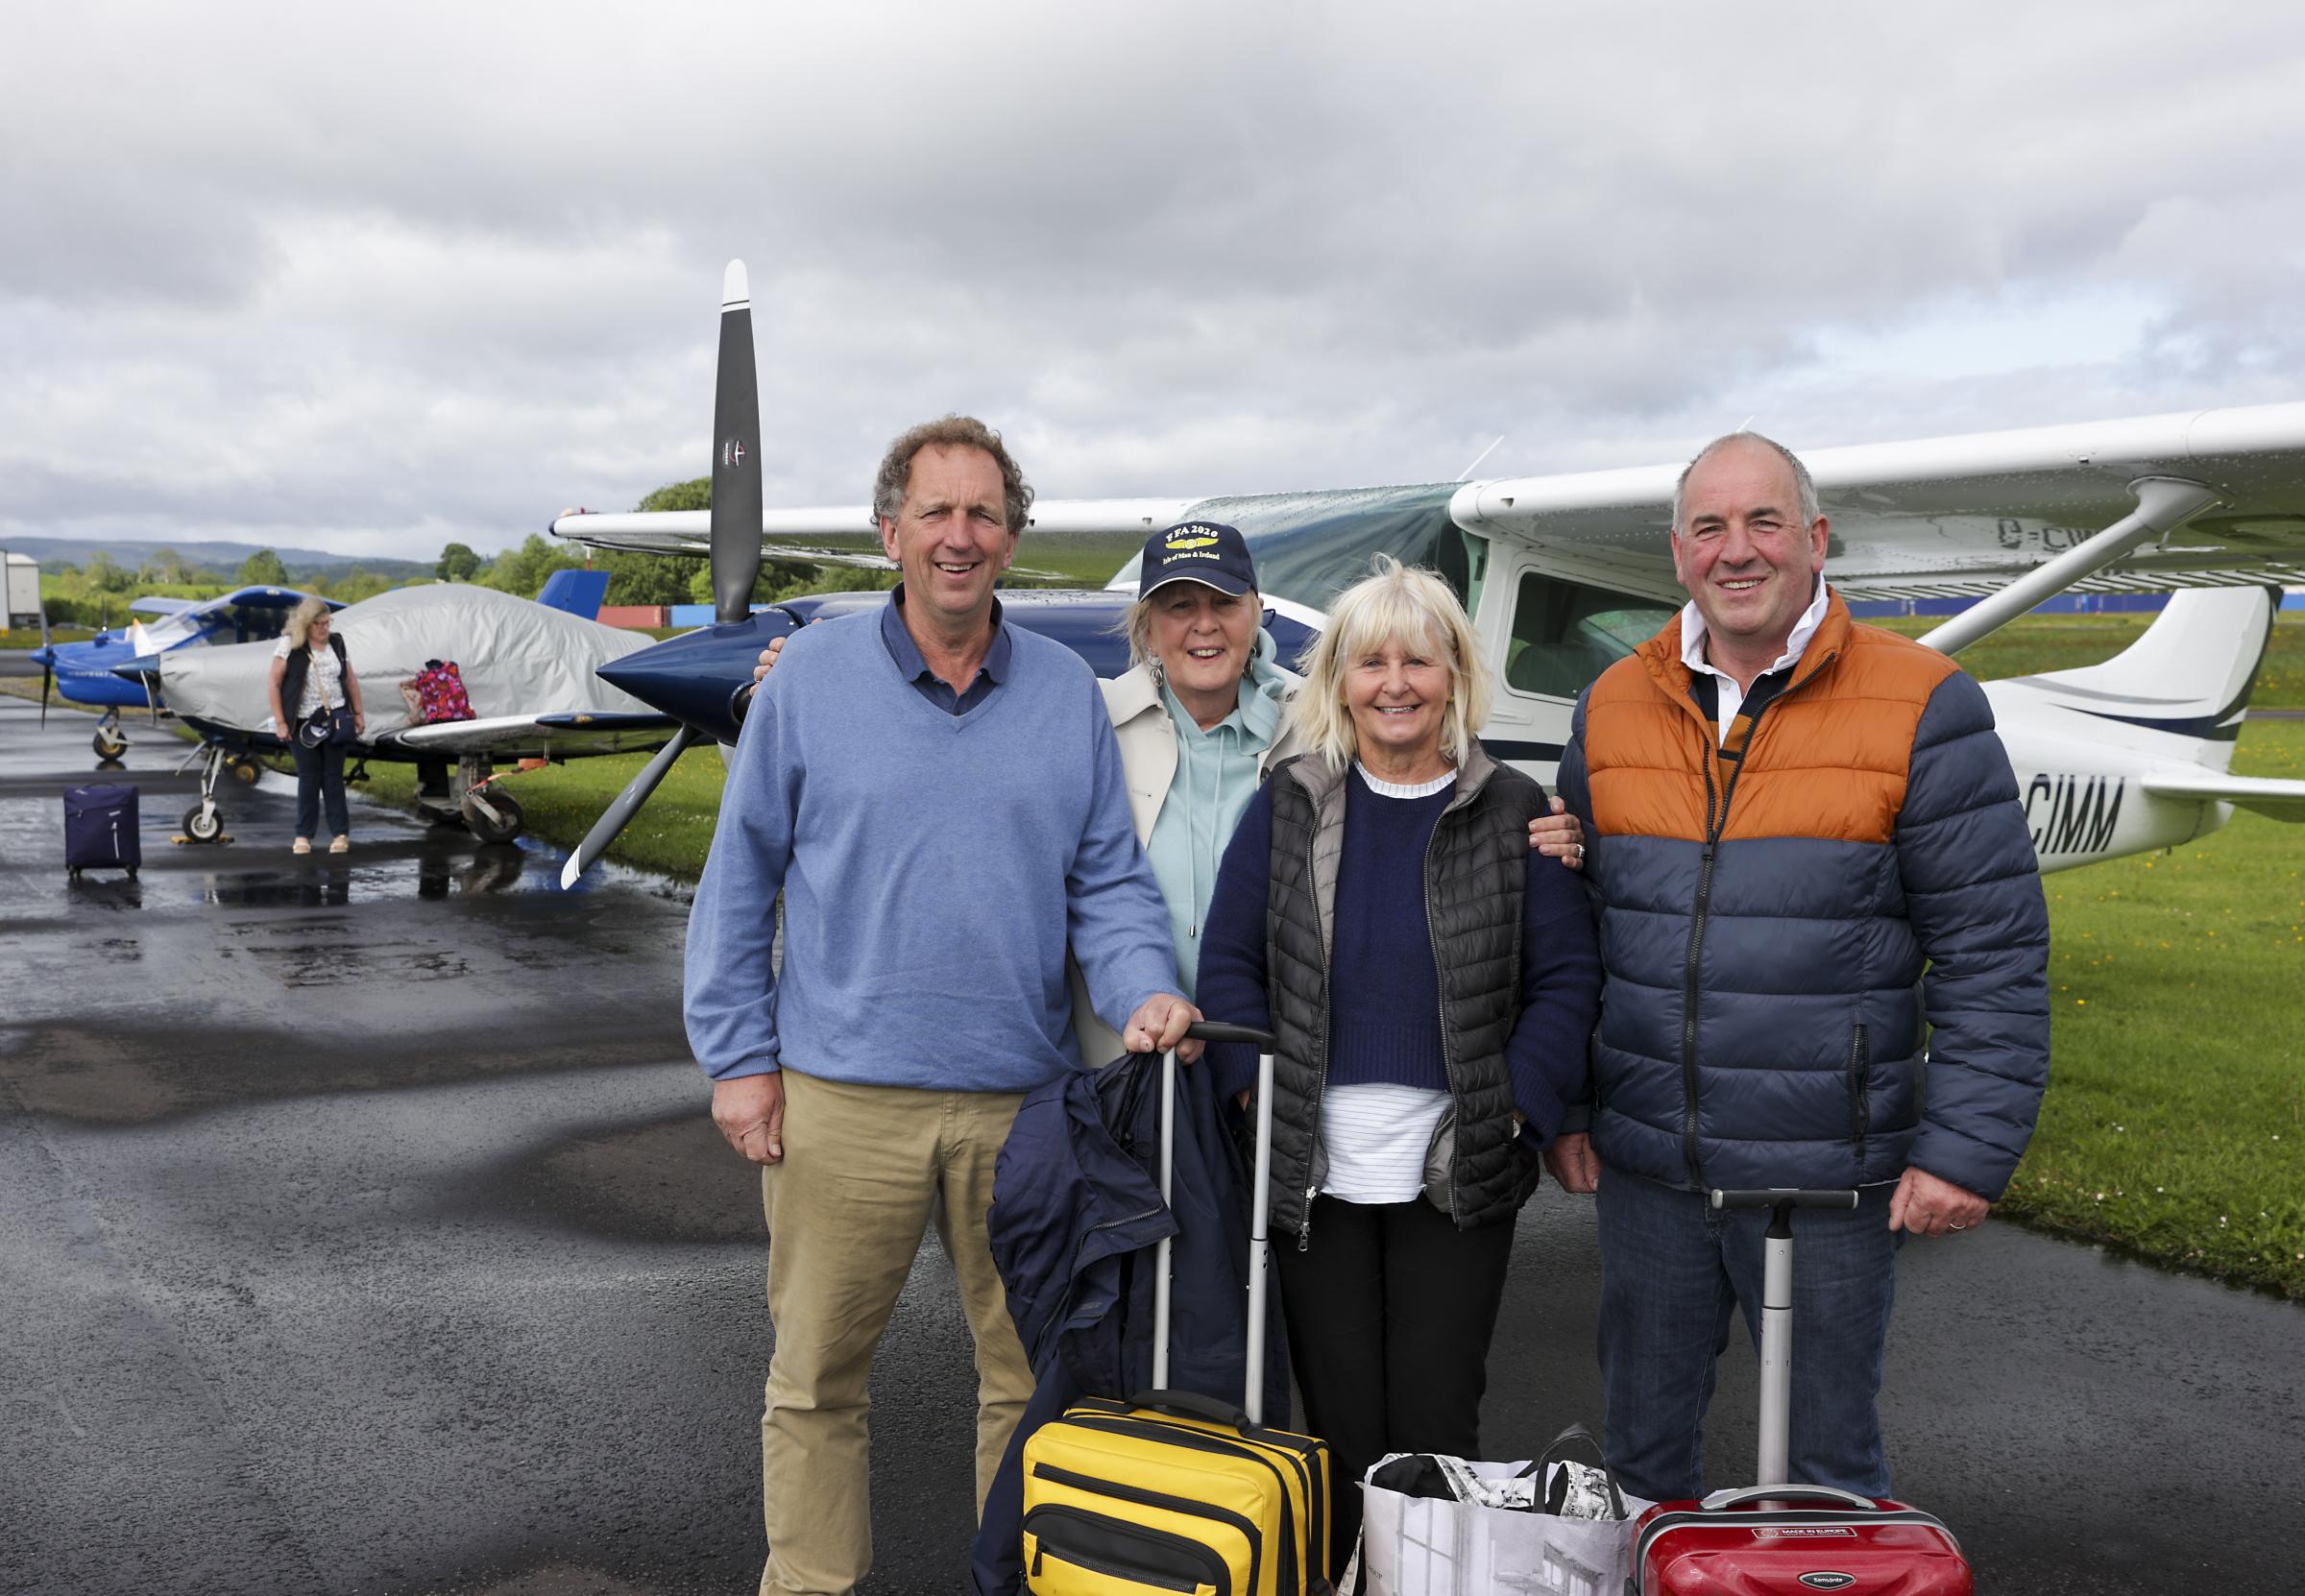 William Graham, (right), and Gail Graham, (second left), with farmer friends, Alf and Jill Oliver on their flying visit to Co.Fermanagh.